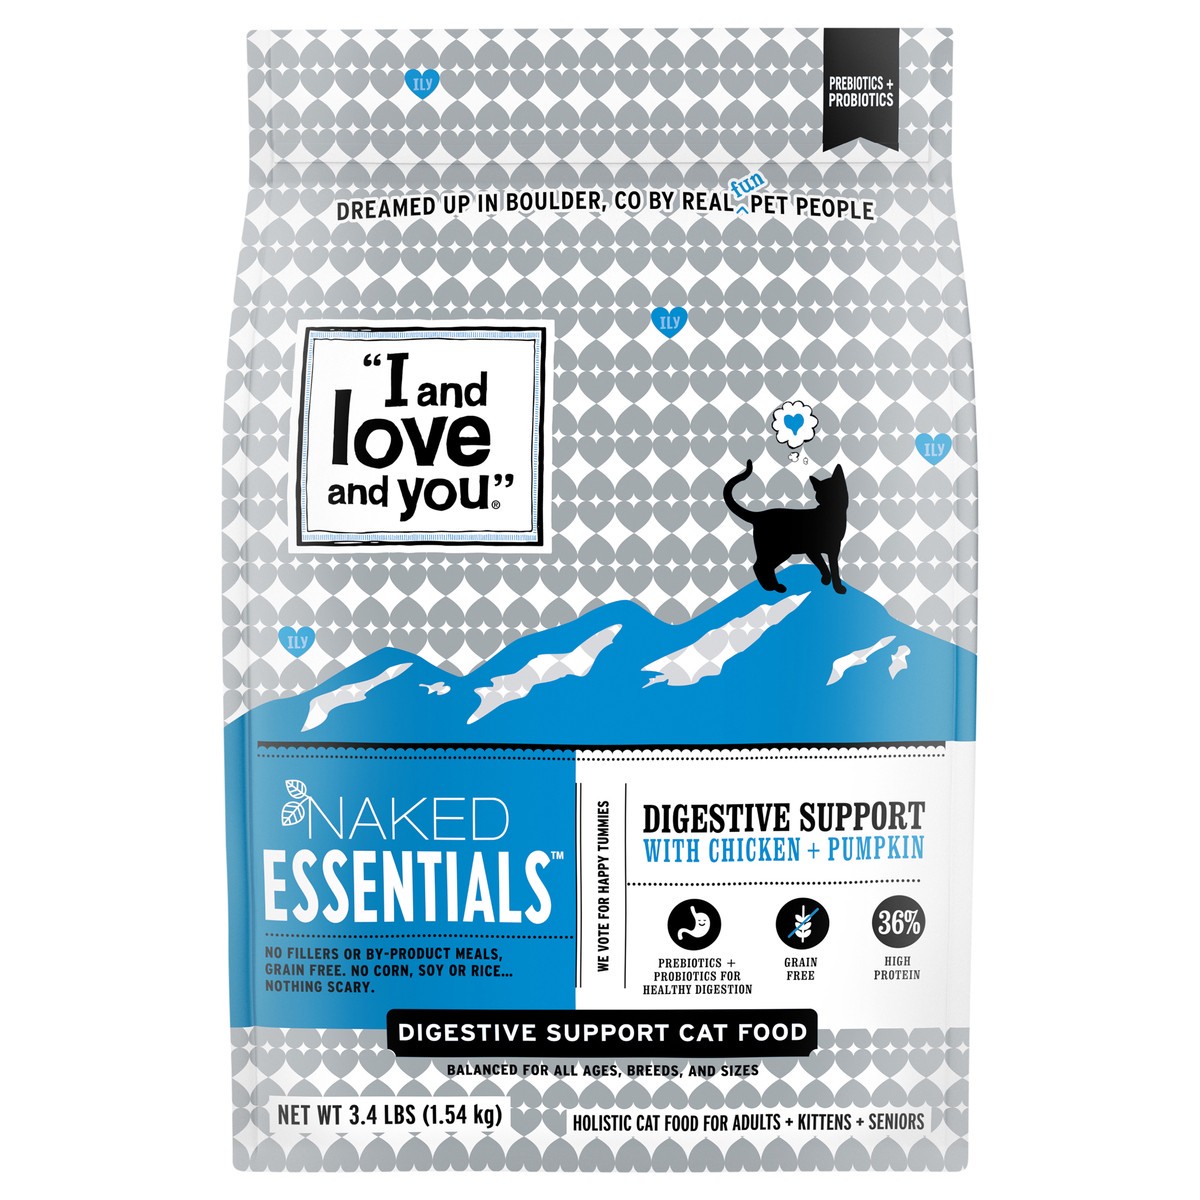 slide 1 of 29, I and Love and You "I and love and you" Naked Essentials Dry Cat Food, Digestive Support Chicken and Pumpkin Recipe, Grain Free, Real Meat, No Fillers, 3.4 lb Bag, 3.4 lb